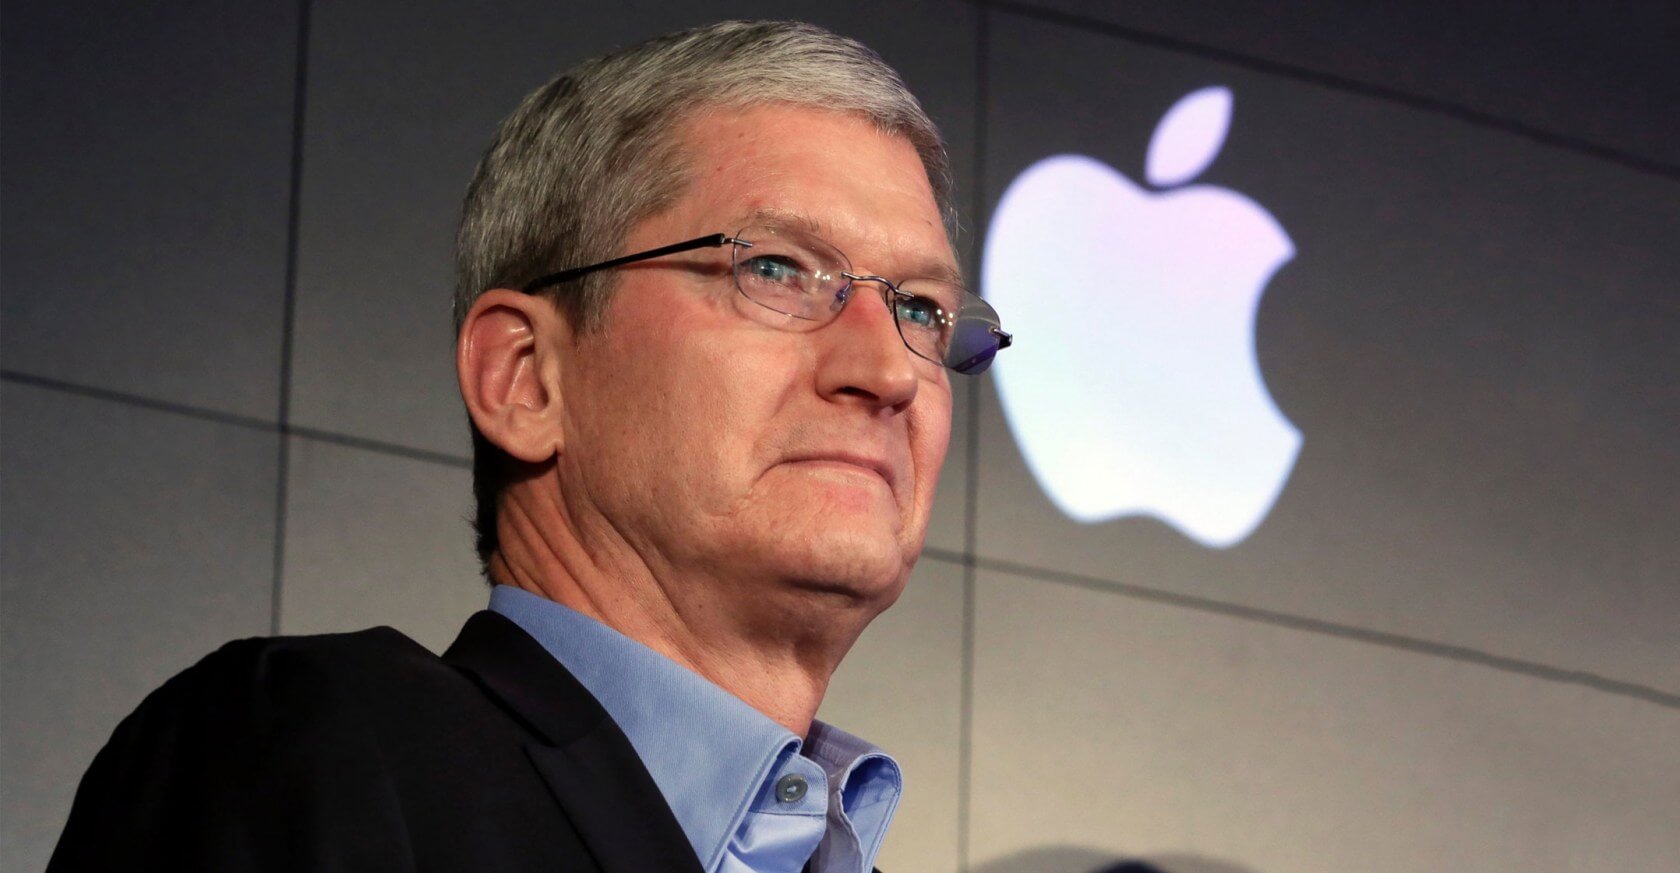 Apple tries to ban former exec's book that it says reveals trade secrets